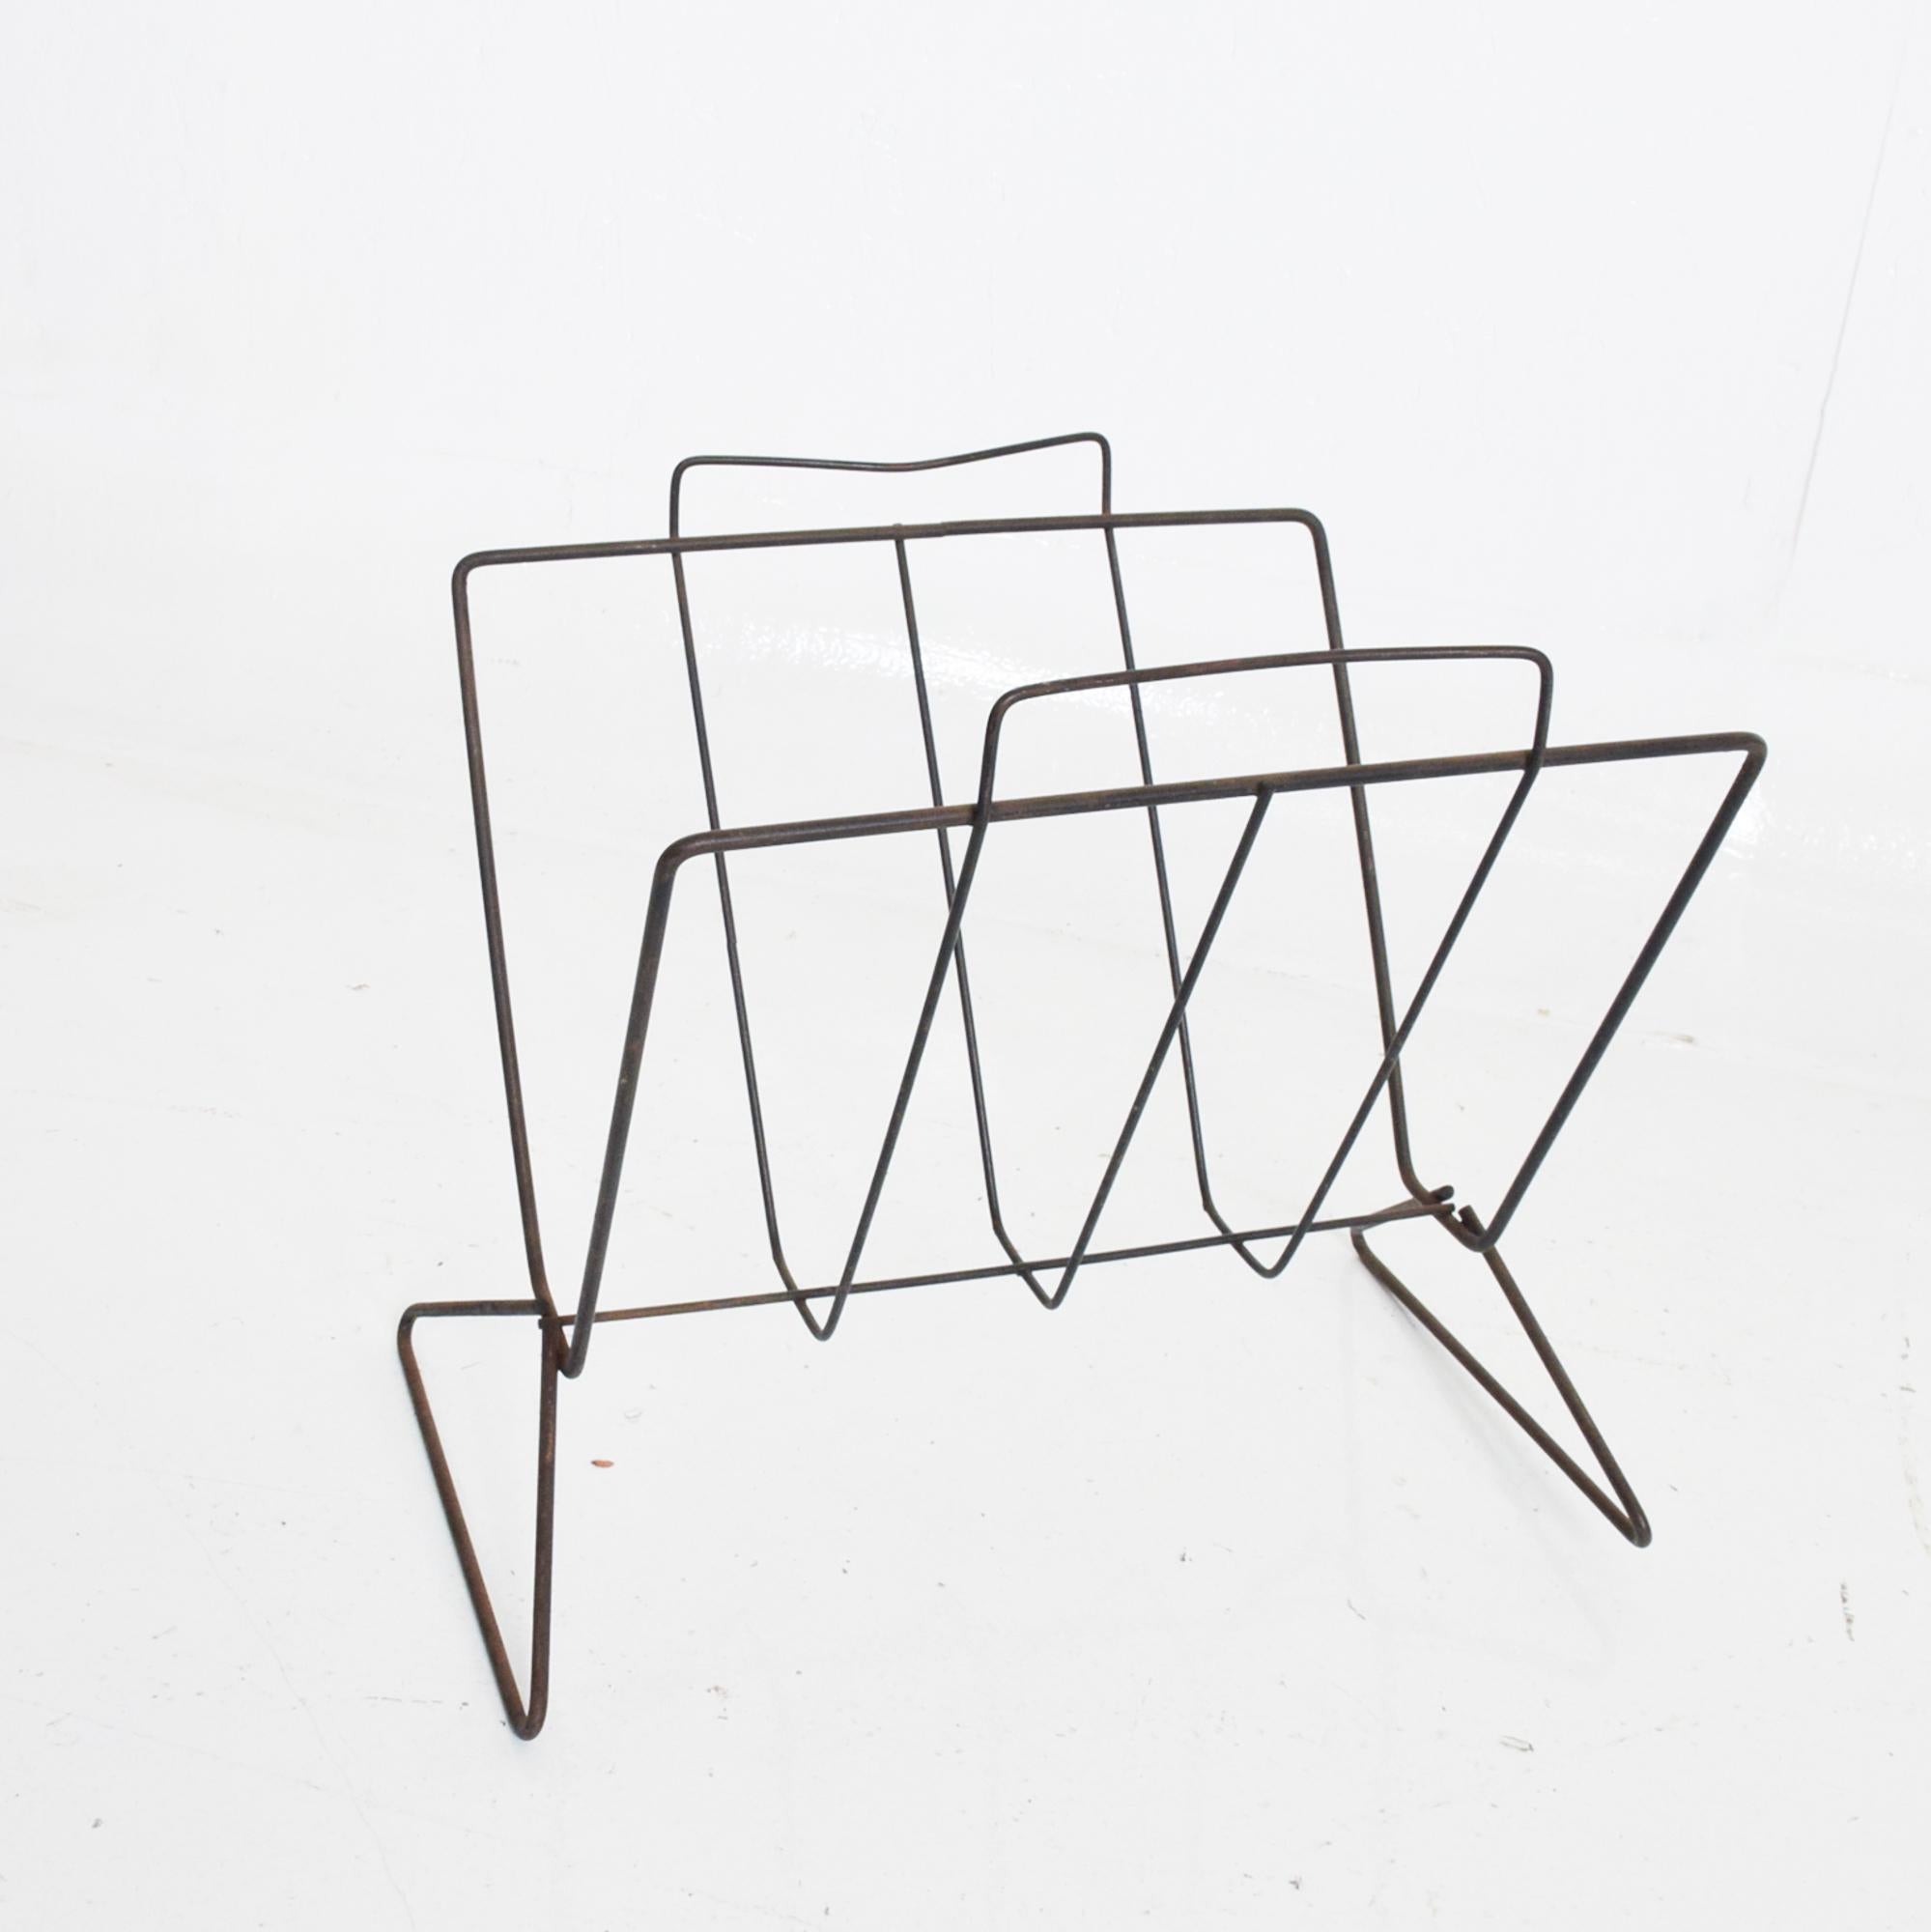 From AMBIANIC
Midcentury Modern sculptural iron in black magazine rack.
Style of Arthur Umanoff - George Nelson Era. USA circa 1960s.
Dimensions: 12 H x 17 W x 10 D inches
Original Unrestored Fair Vintage Condition. Wear and nicks present to the